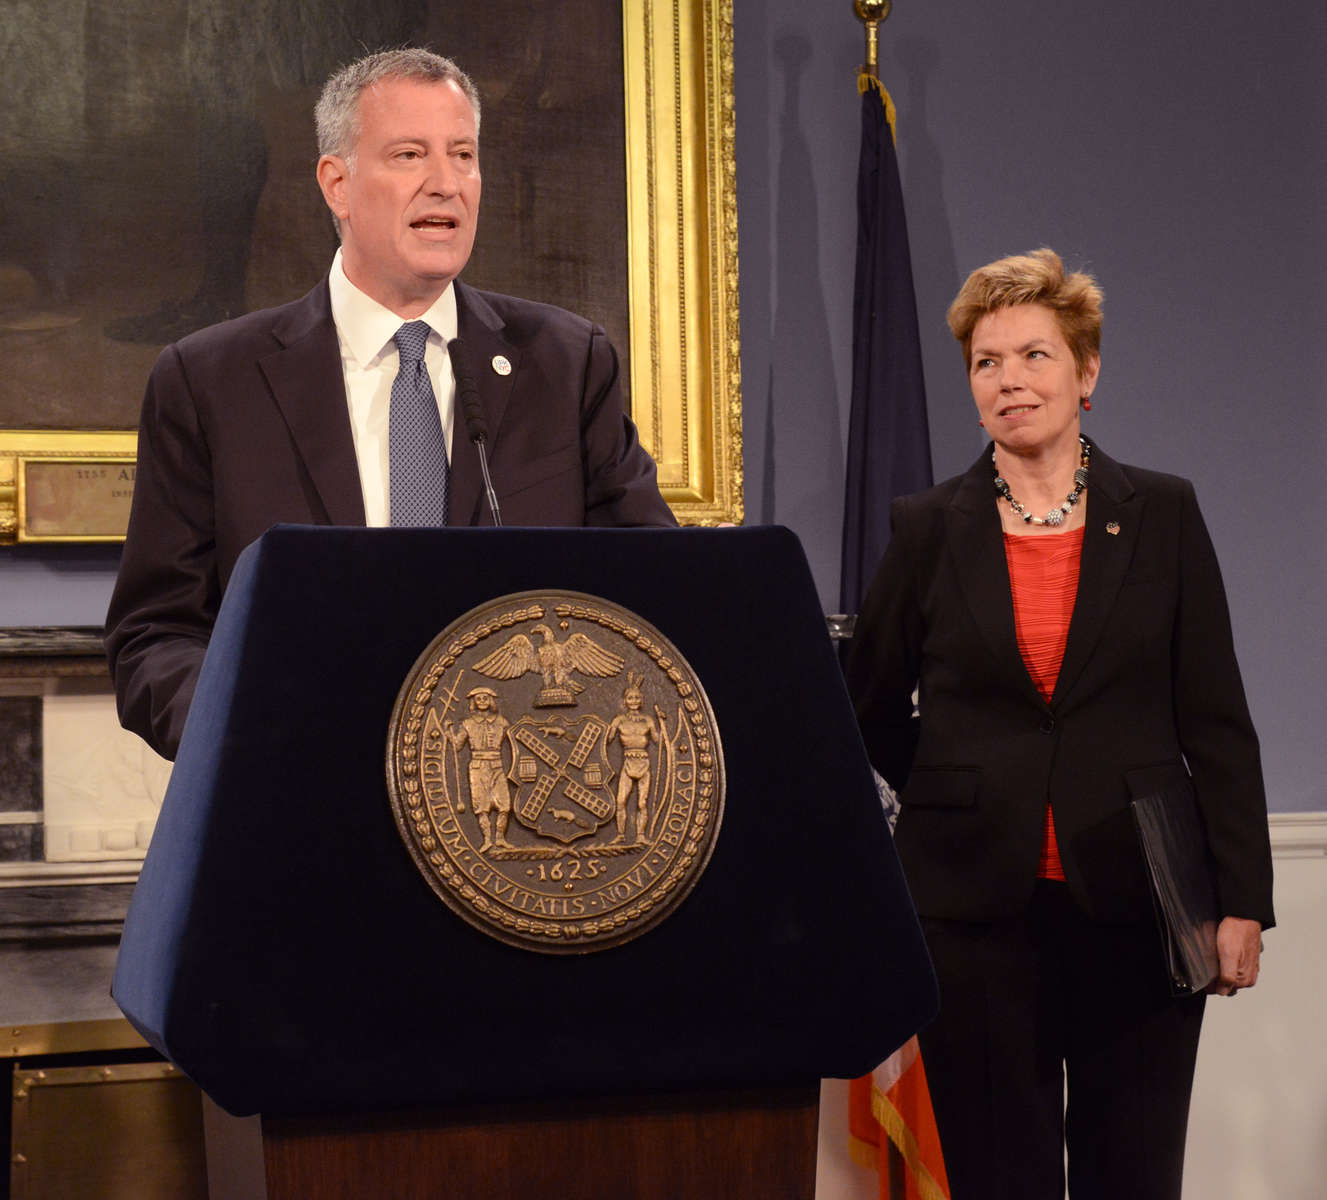 Mayor Bill de Blasio announces the appointment of Loree Sutton, right, as Commissioner of the Mayor's Office of Veteran' Affairs.  Blue Room, City Hall.  August 18, 2014